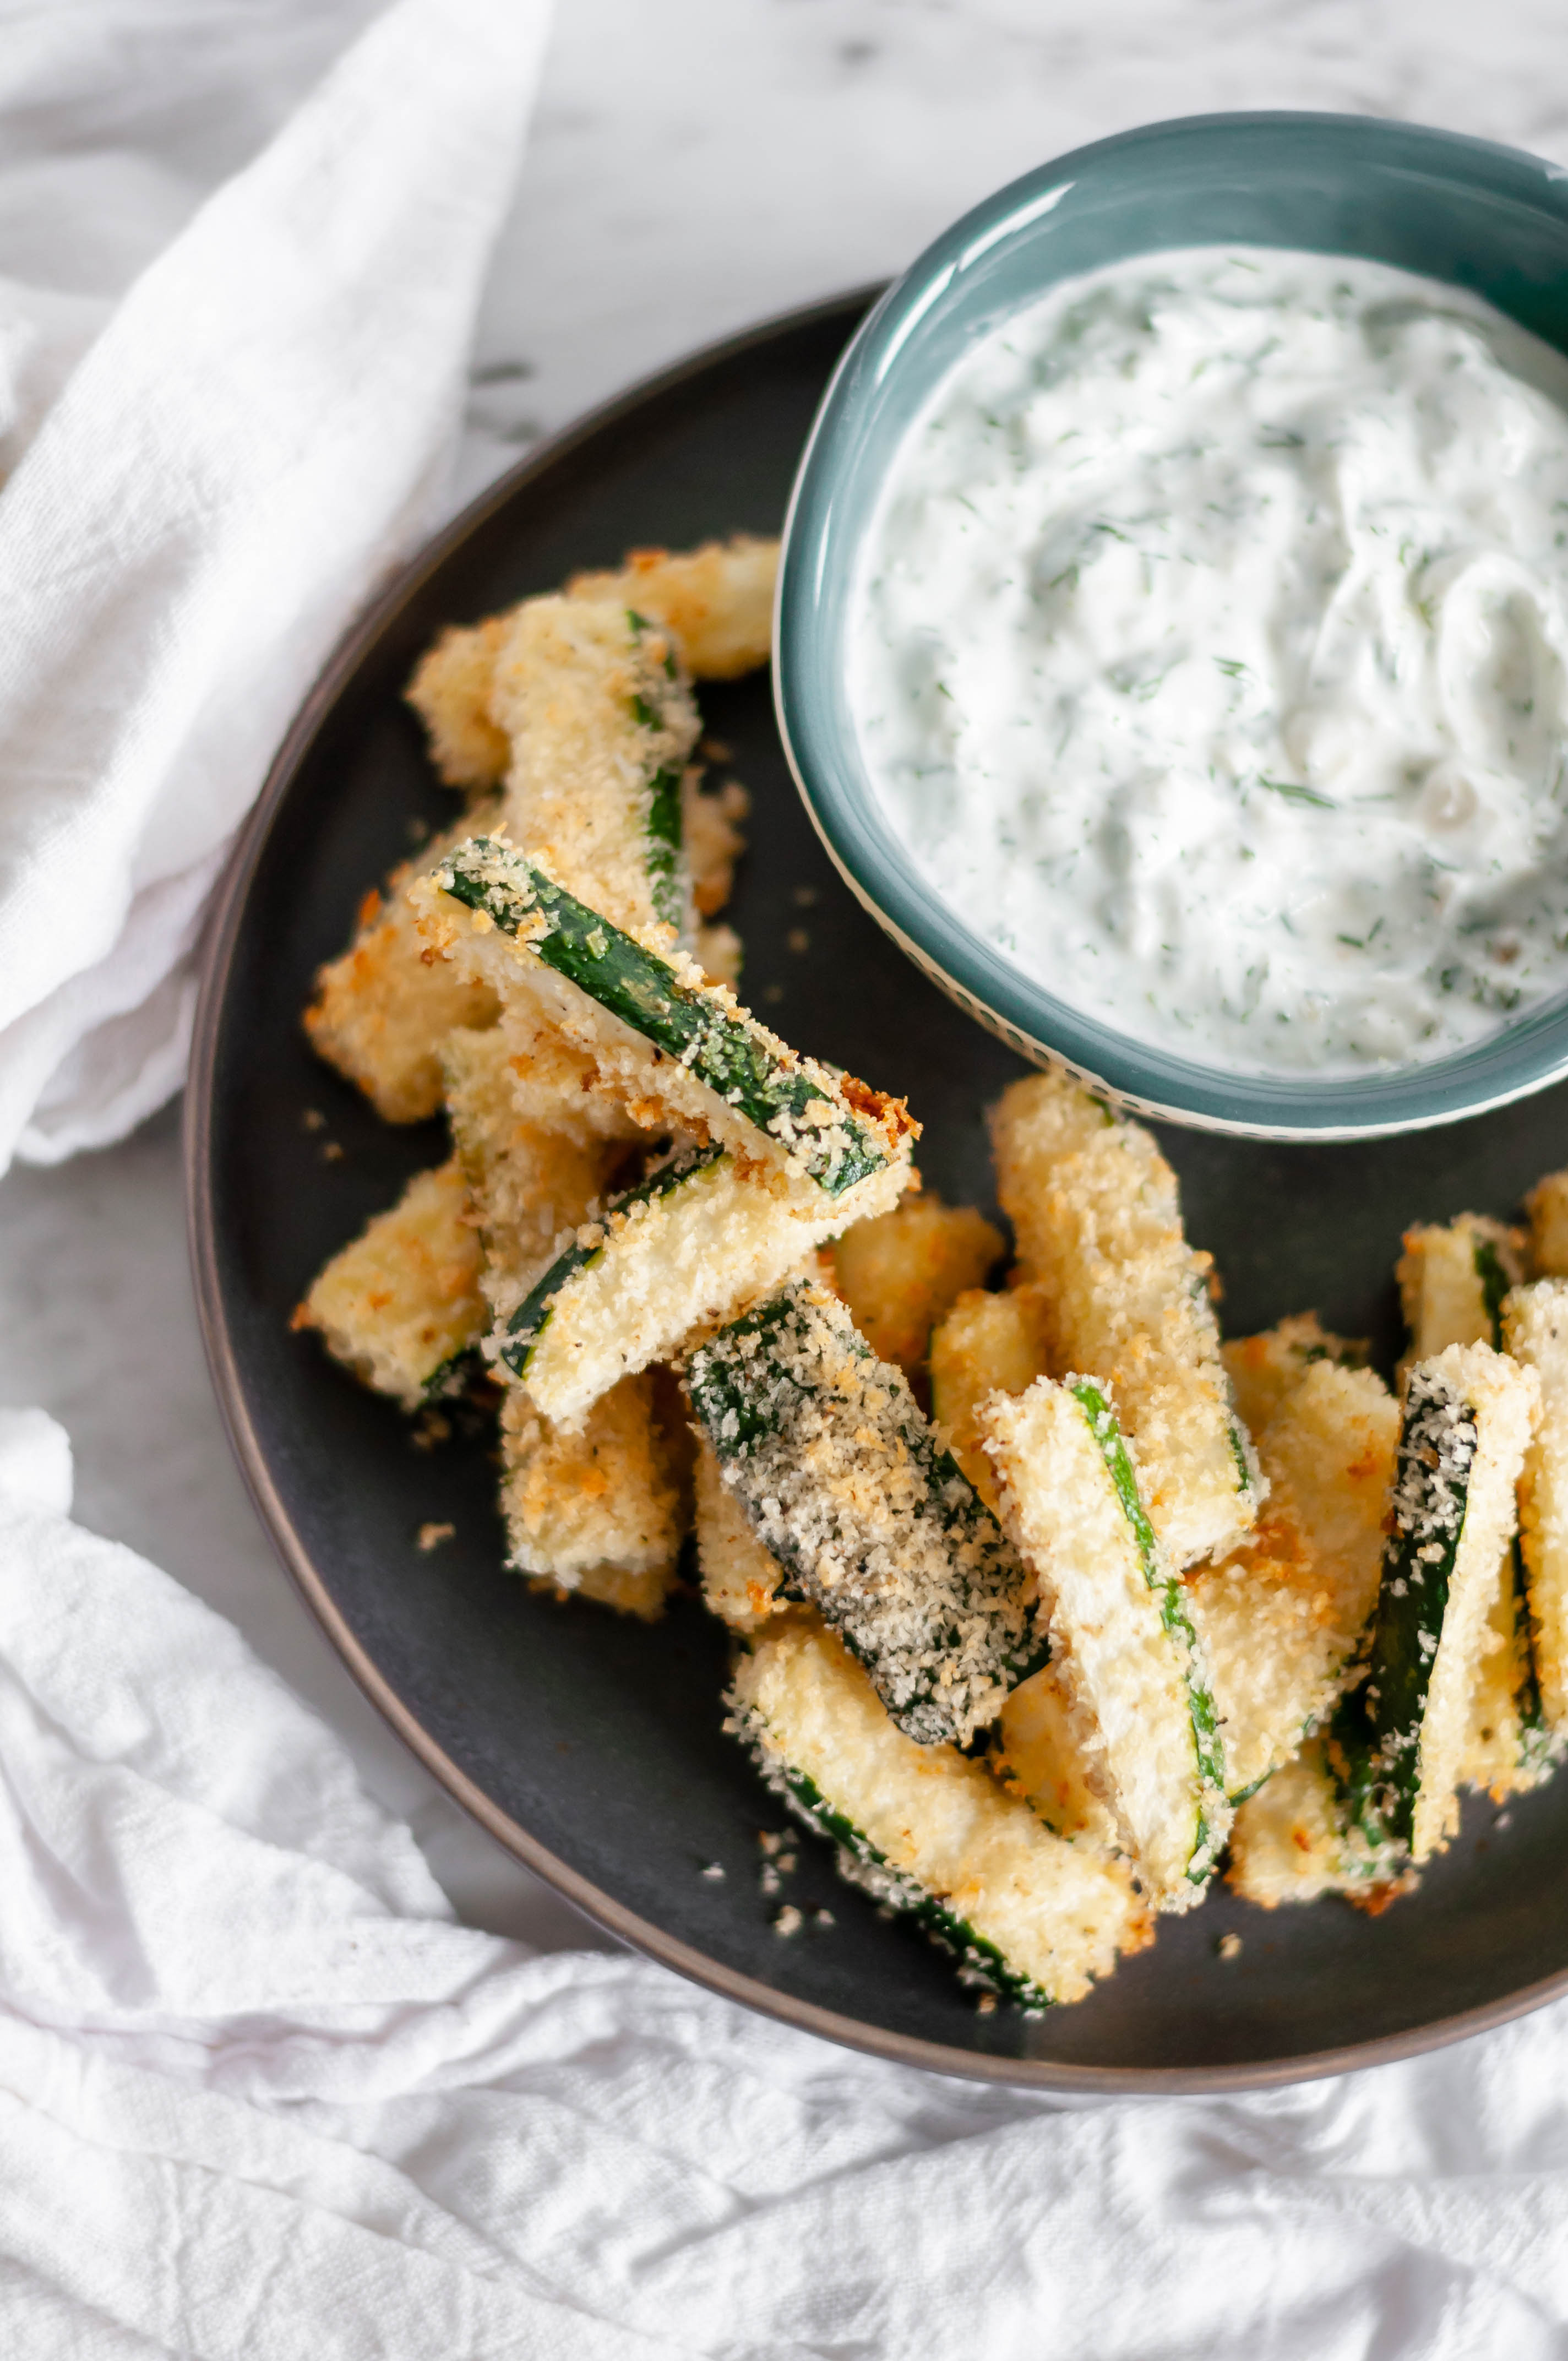 Crispy Zucchini Fries with Dill Feta Dip are super crispy and oven baked to perfection.